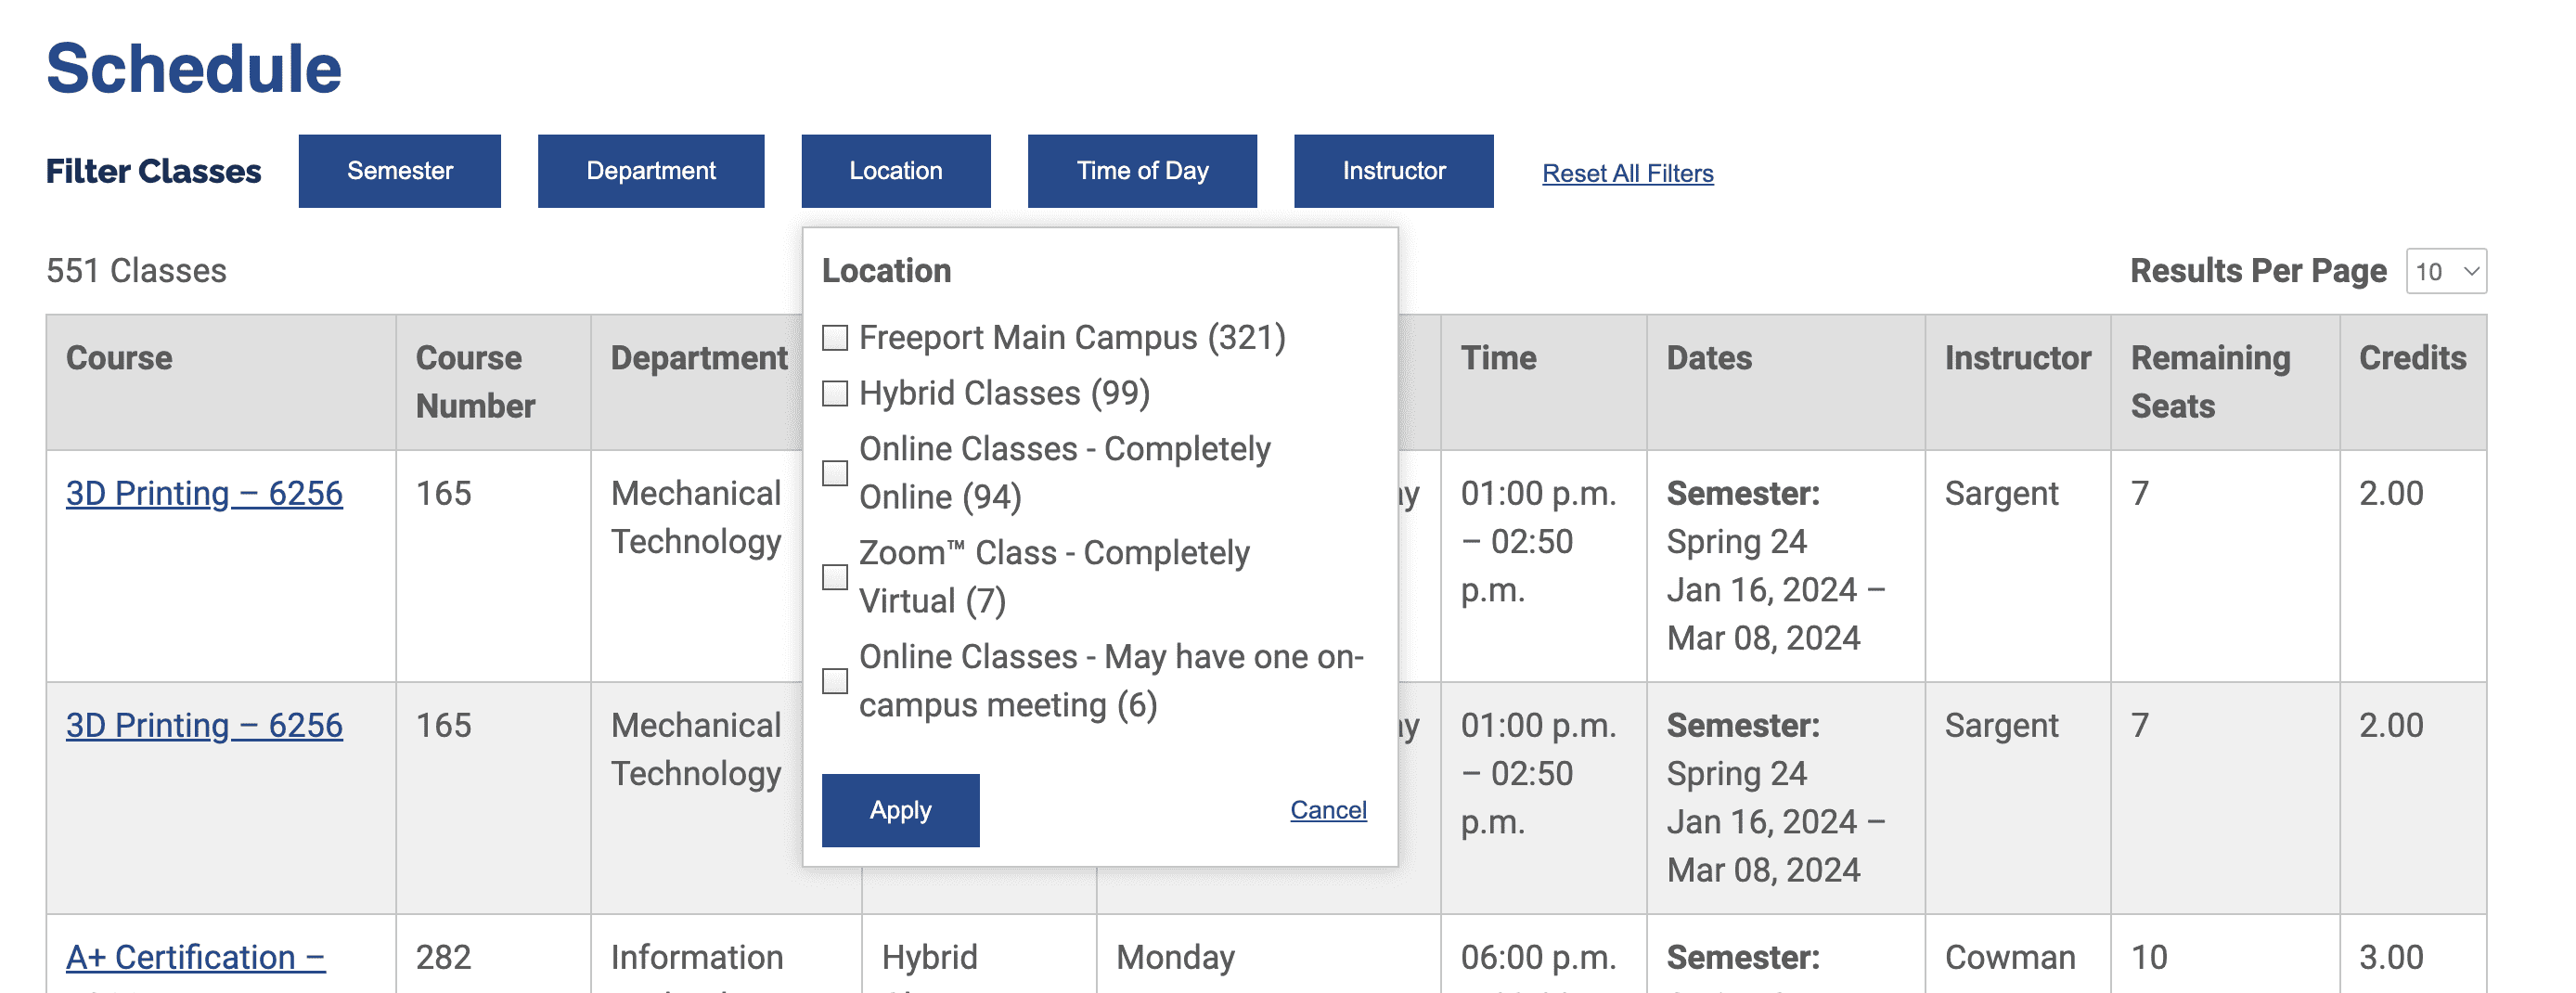 Expanded Location Filter on the college schedule page showing a dropdown open below the location button with checkboxes in it for various class locations (on campus, hybrid, online), an Apply button and cancel button styled like a link.